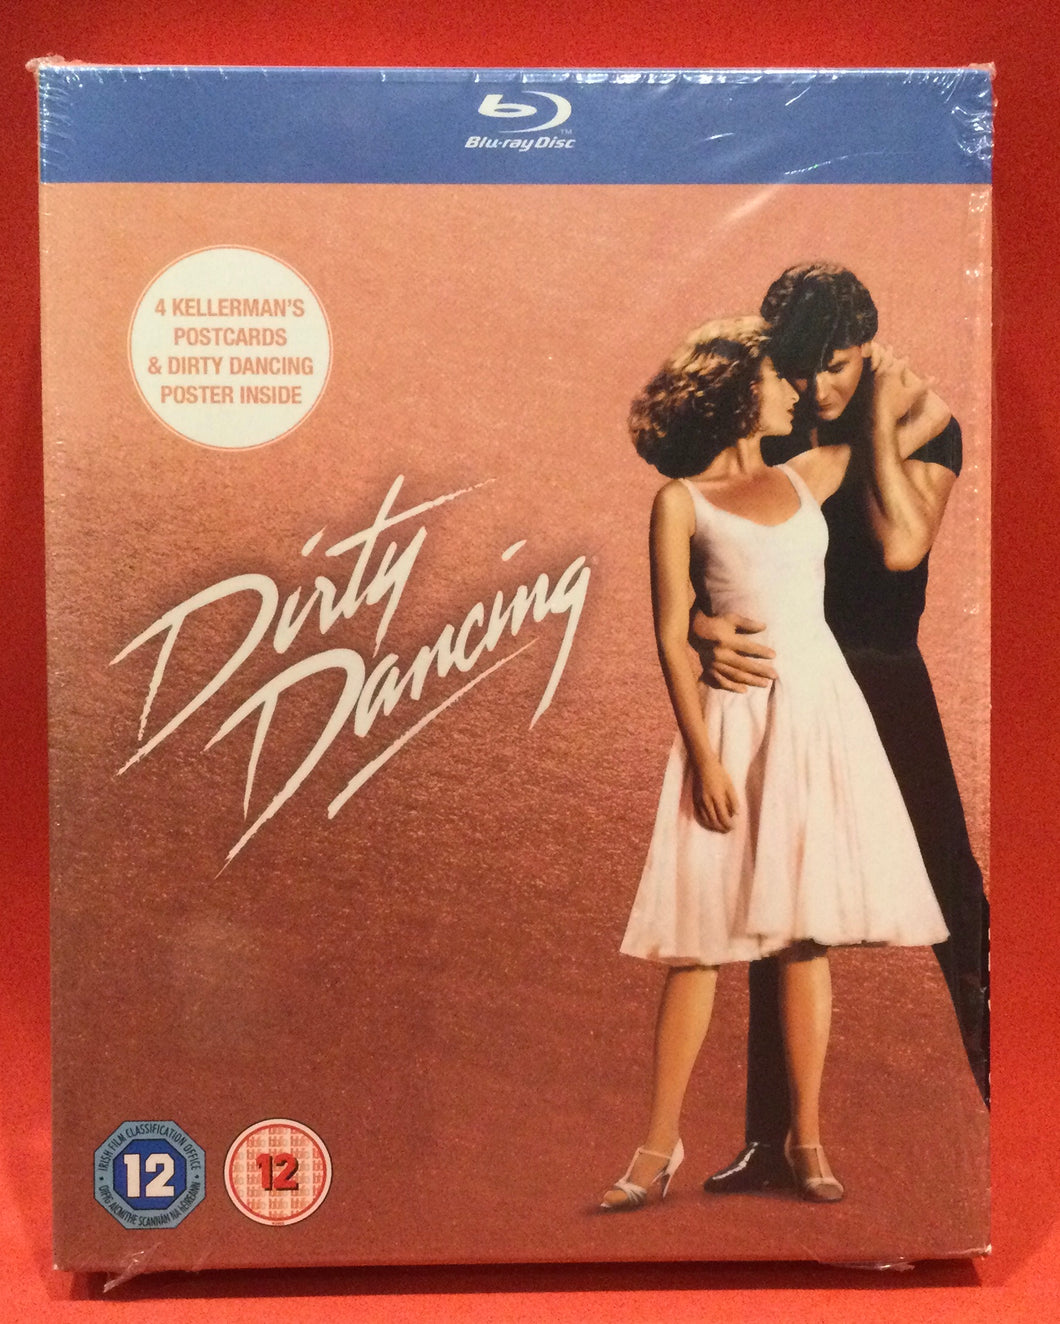 DIRTY DANCING - BLU-RAY - INCLUDES POSTER (SEALED)